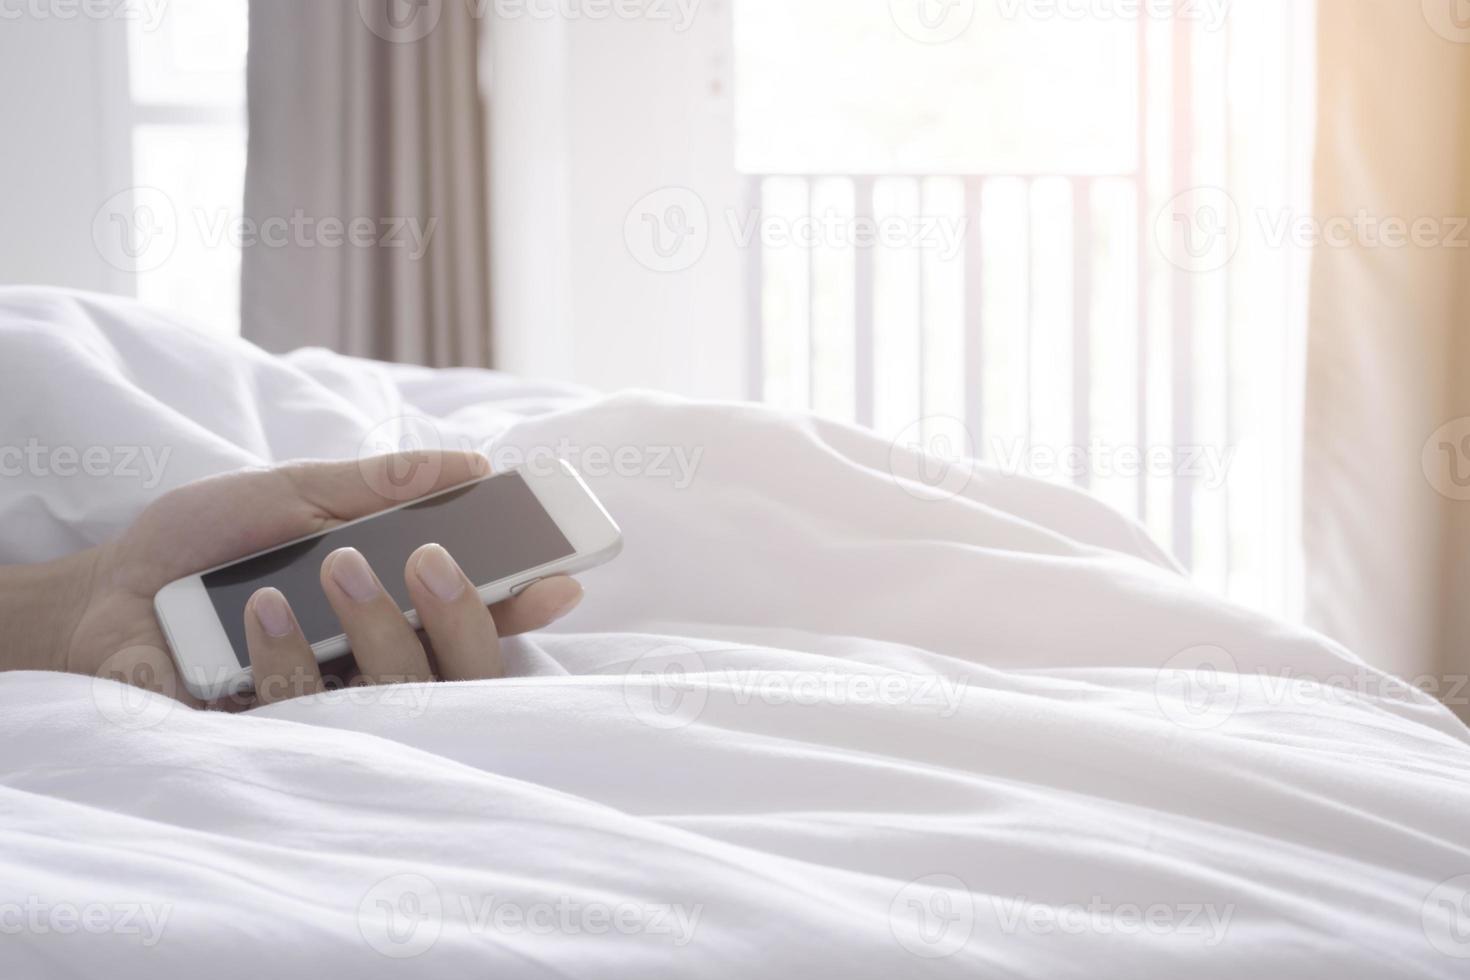 Hand holding smartphone on white bed in morning photo